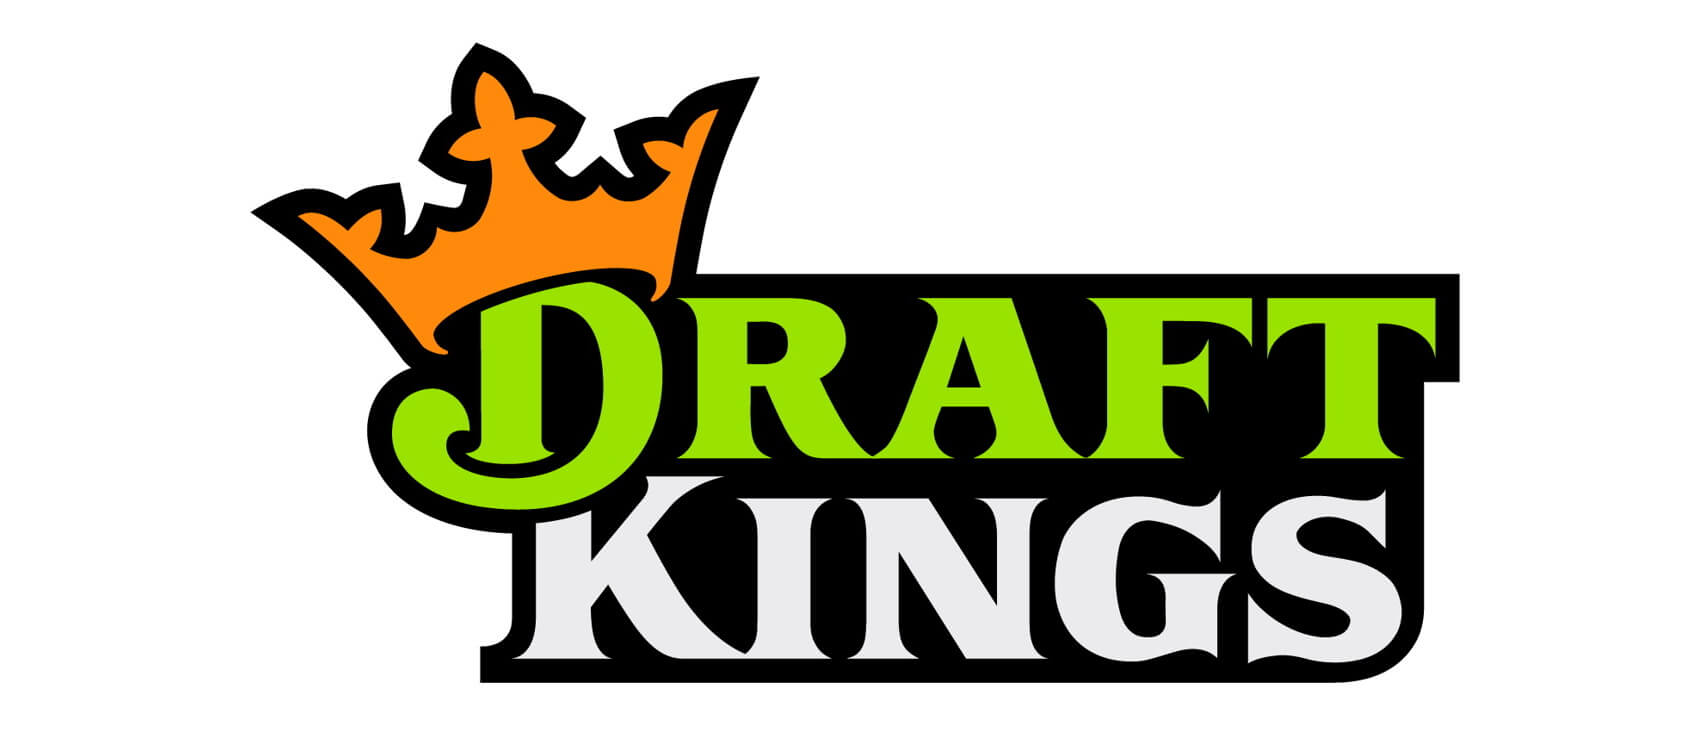 DraftKings Makes Late Bid for PointsBet's US Operations